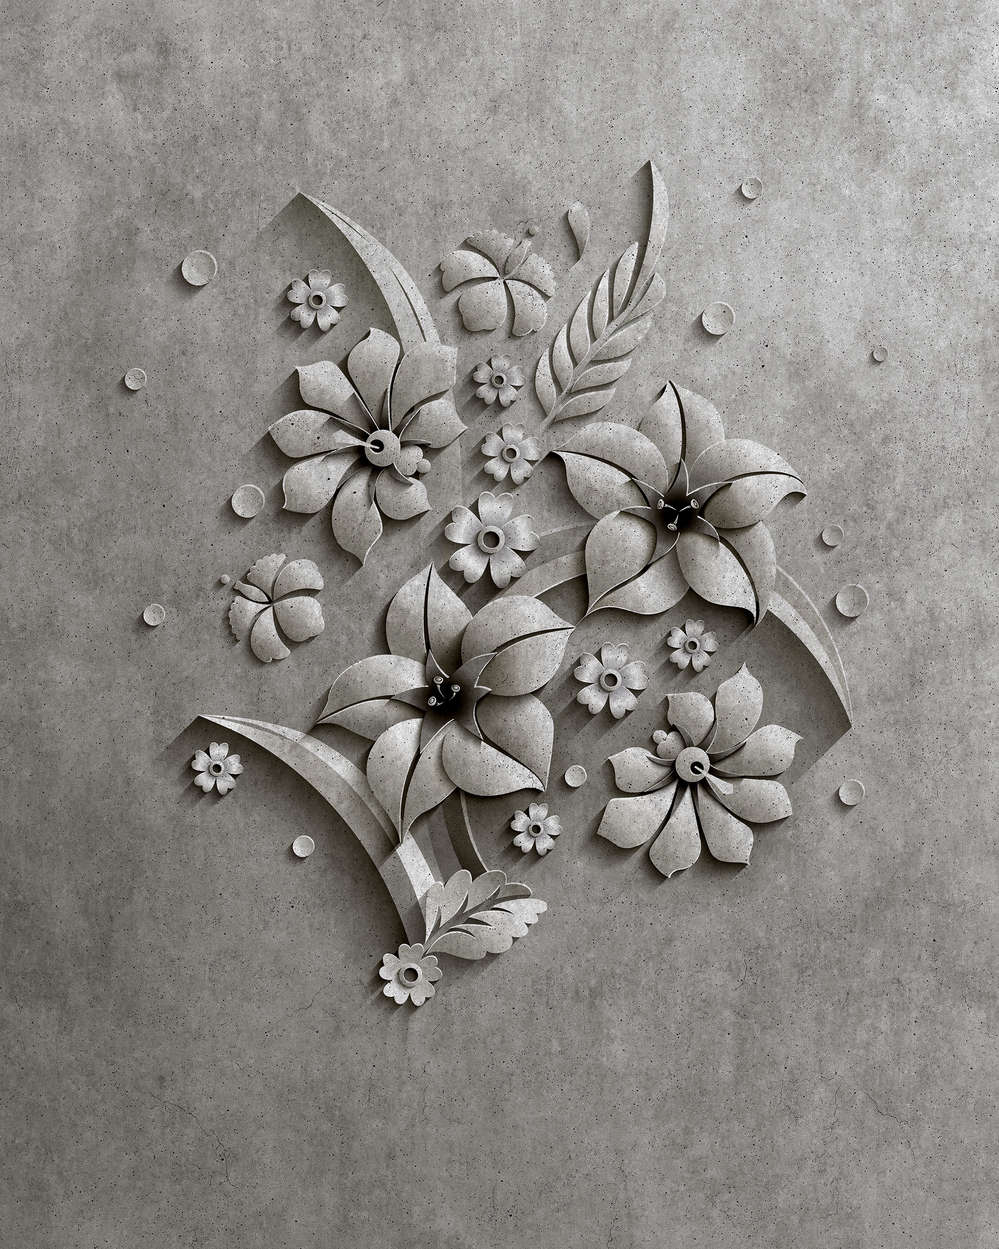             Relief 1 - Photo wallpaper in concrete structure of a flower relief - grey, black | mother-of-pearl smooth fleece
        